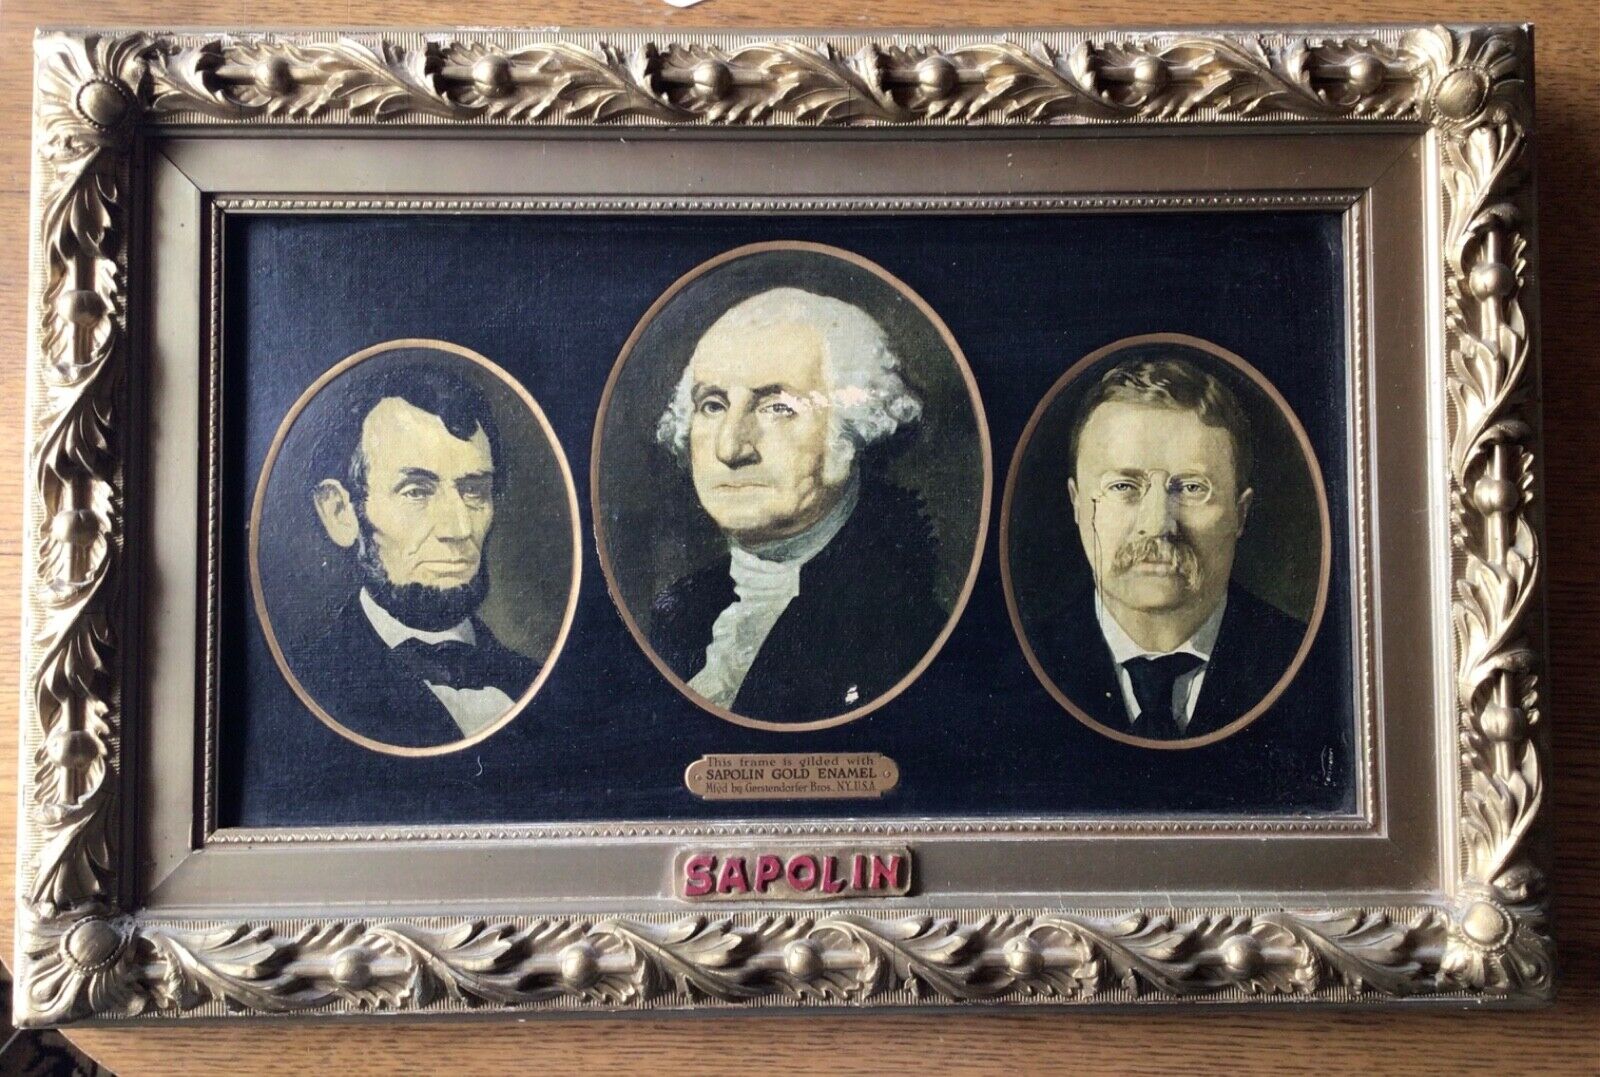 Antique SAPOLIN  Gold Enamel  Paint Advertising Sign with 3 Presidents - Nice 